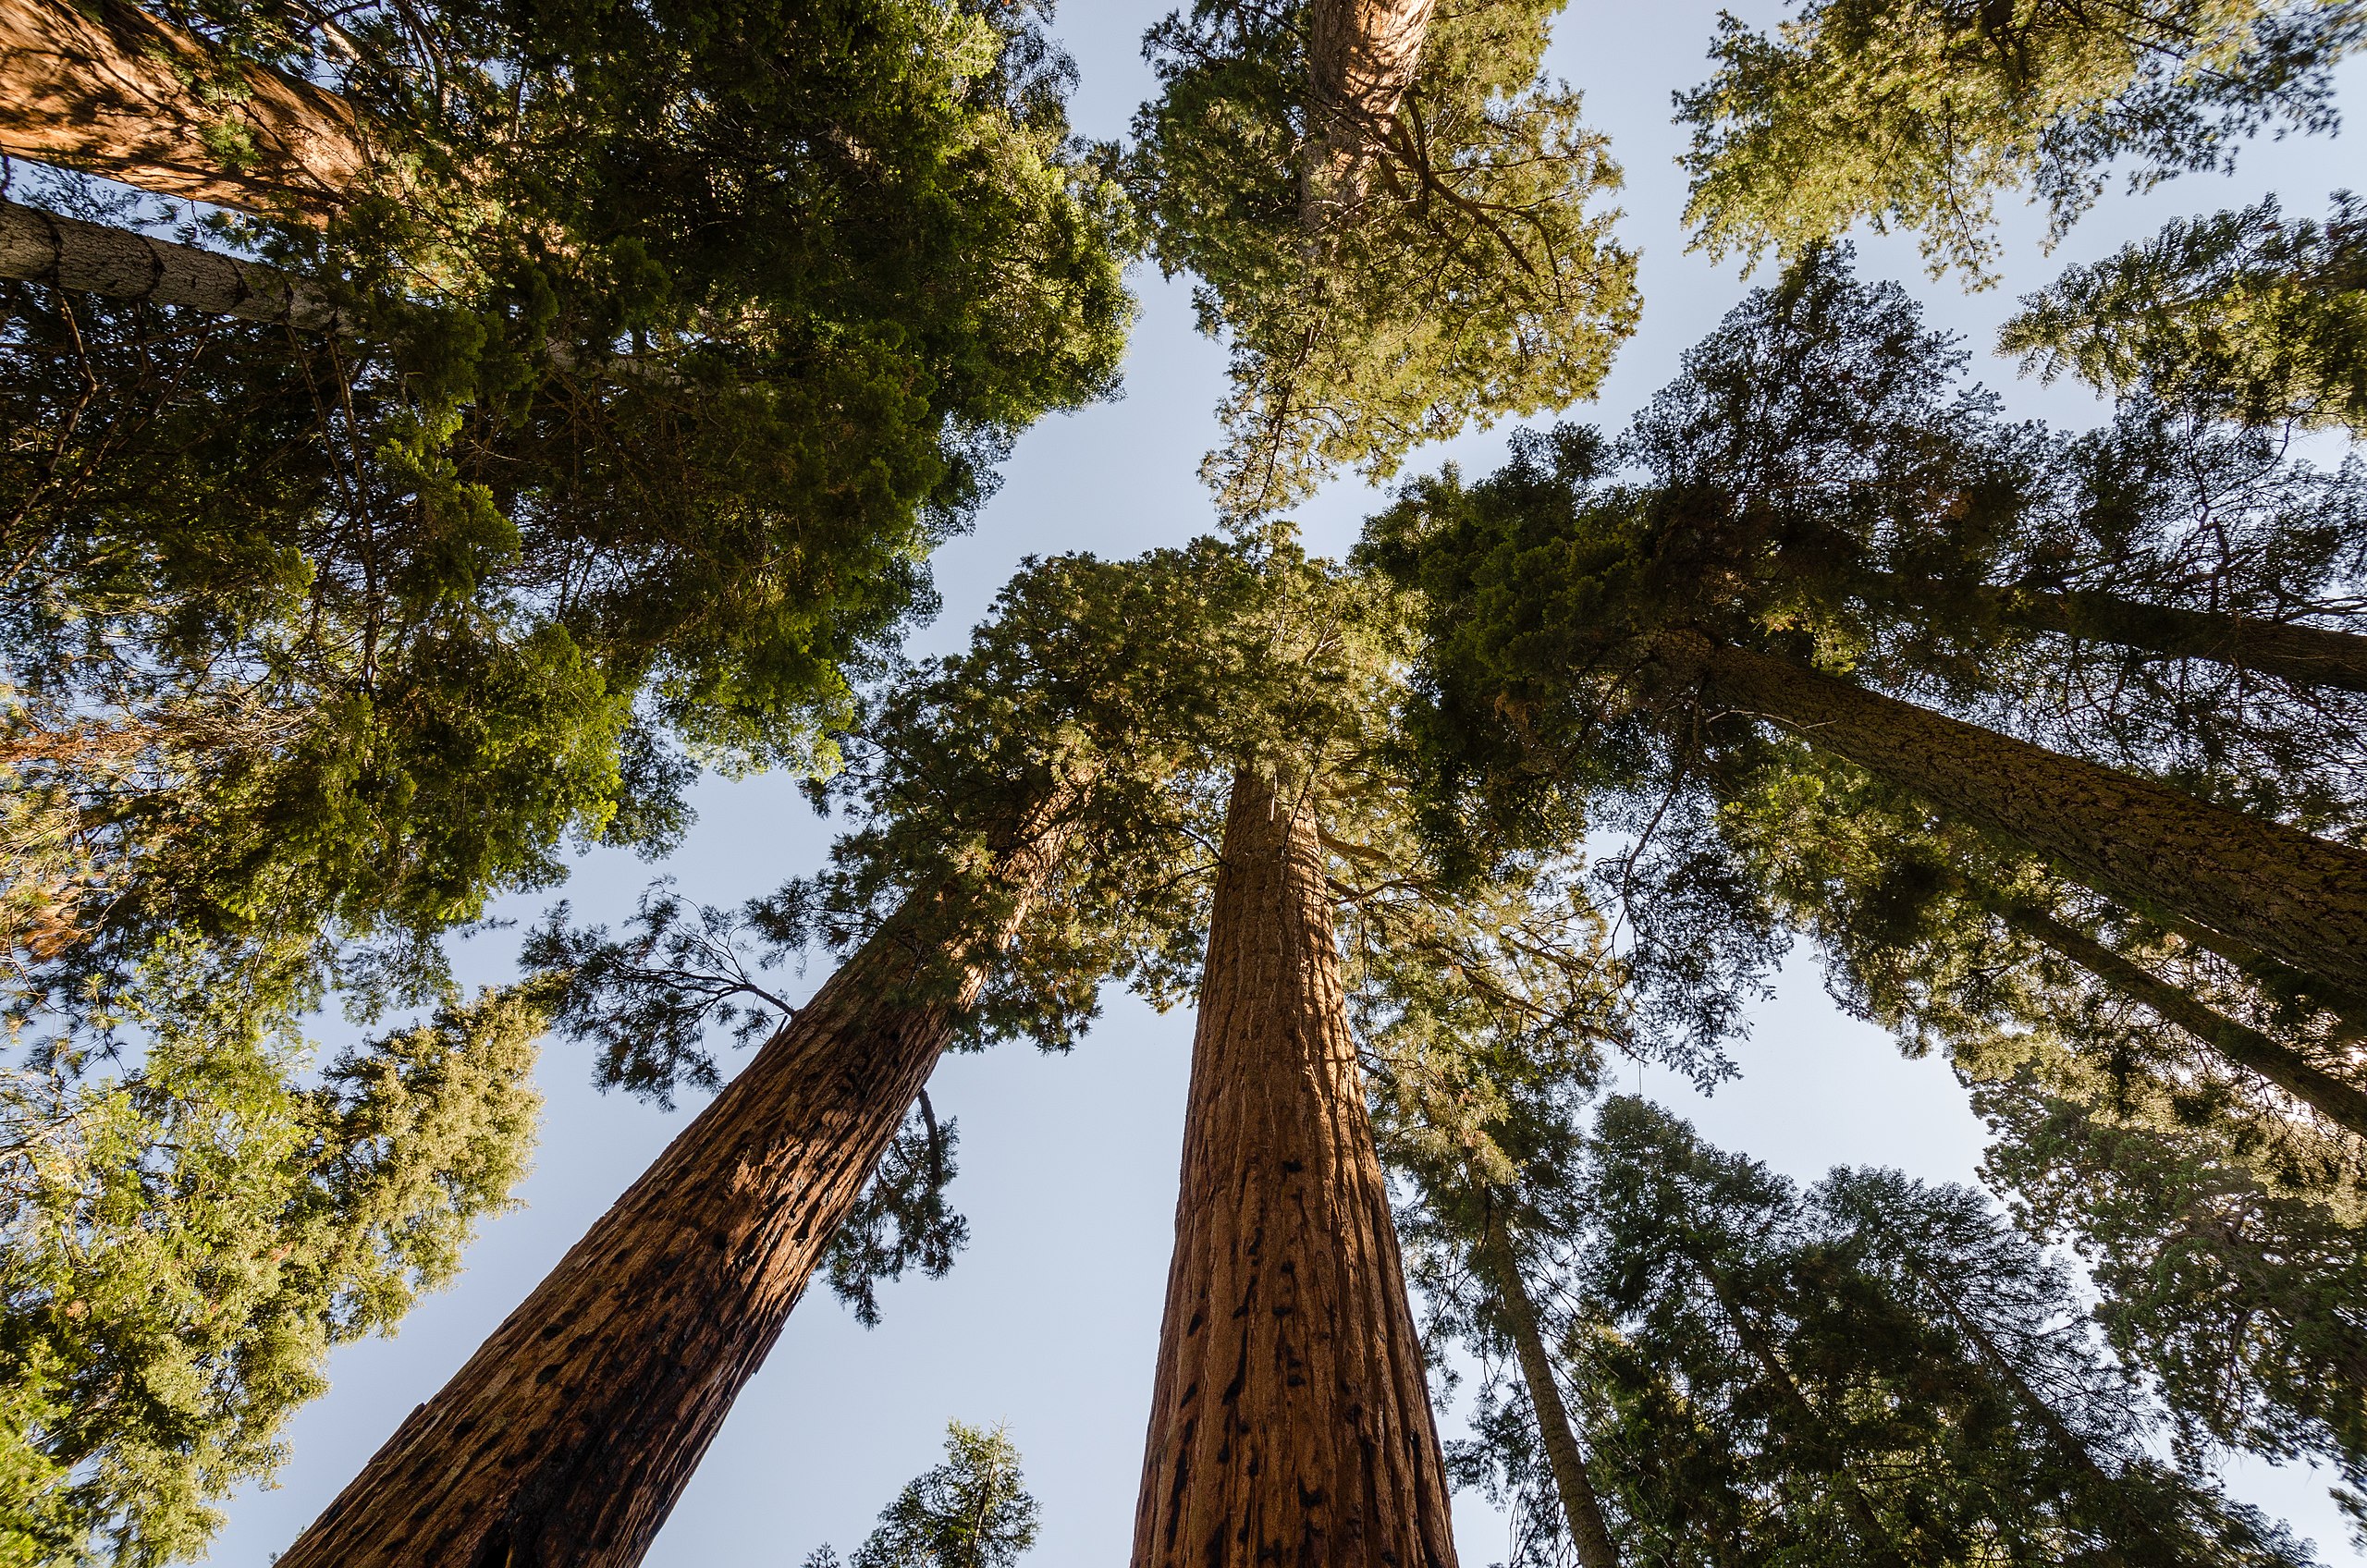 The largest sequoia trees are equivalent in height to a 26-story building | General Grant Tree